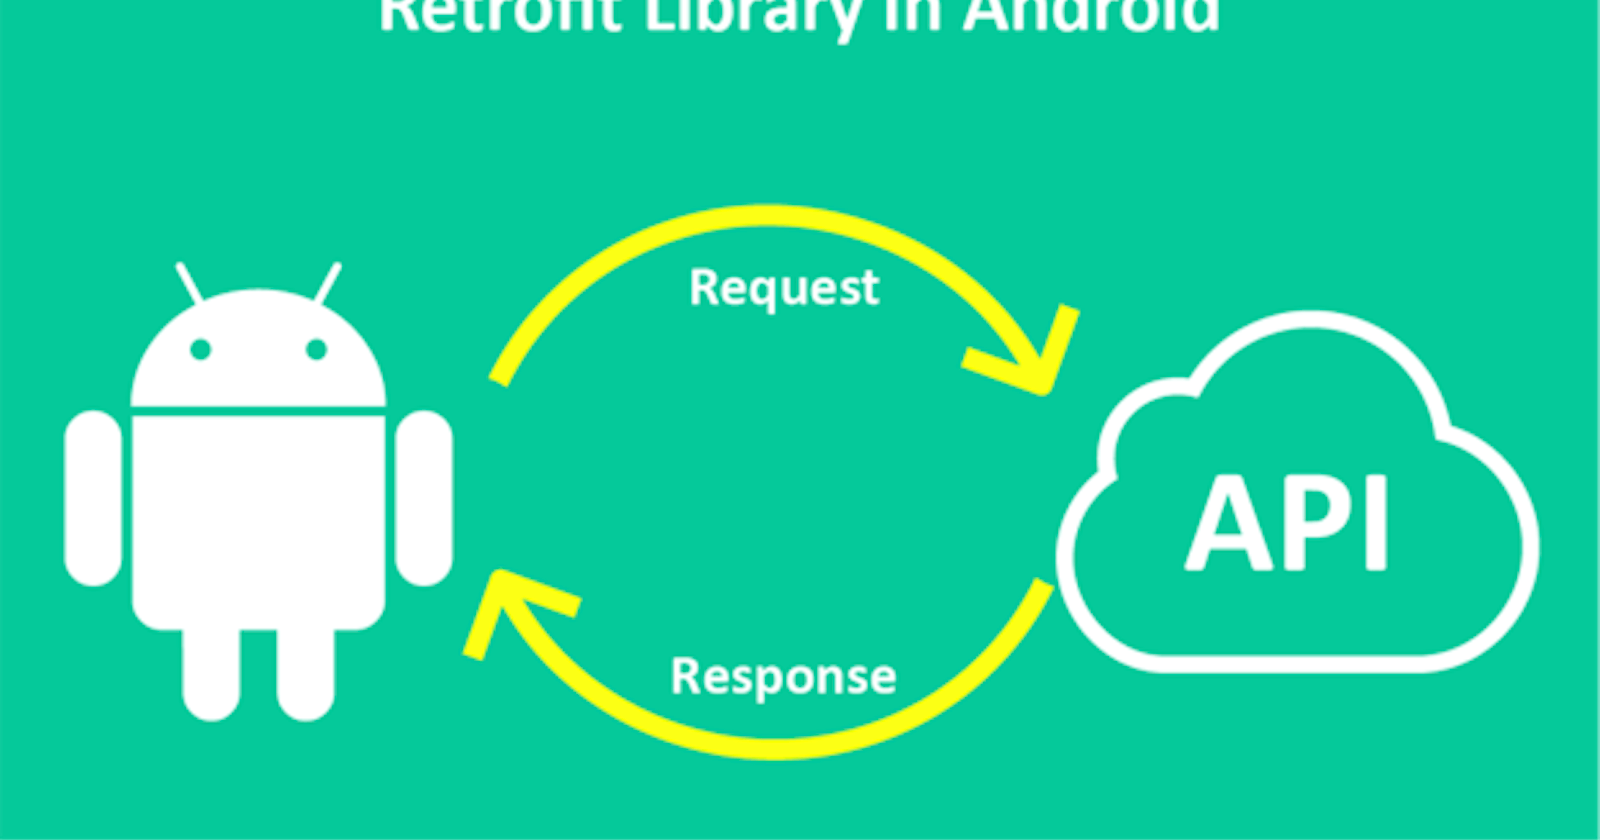 Starter Guide to Retrofit - Android Studio- Part Two